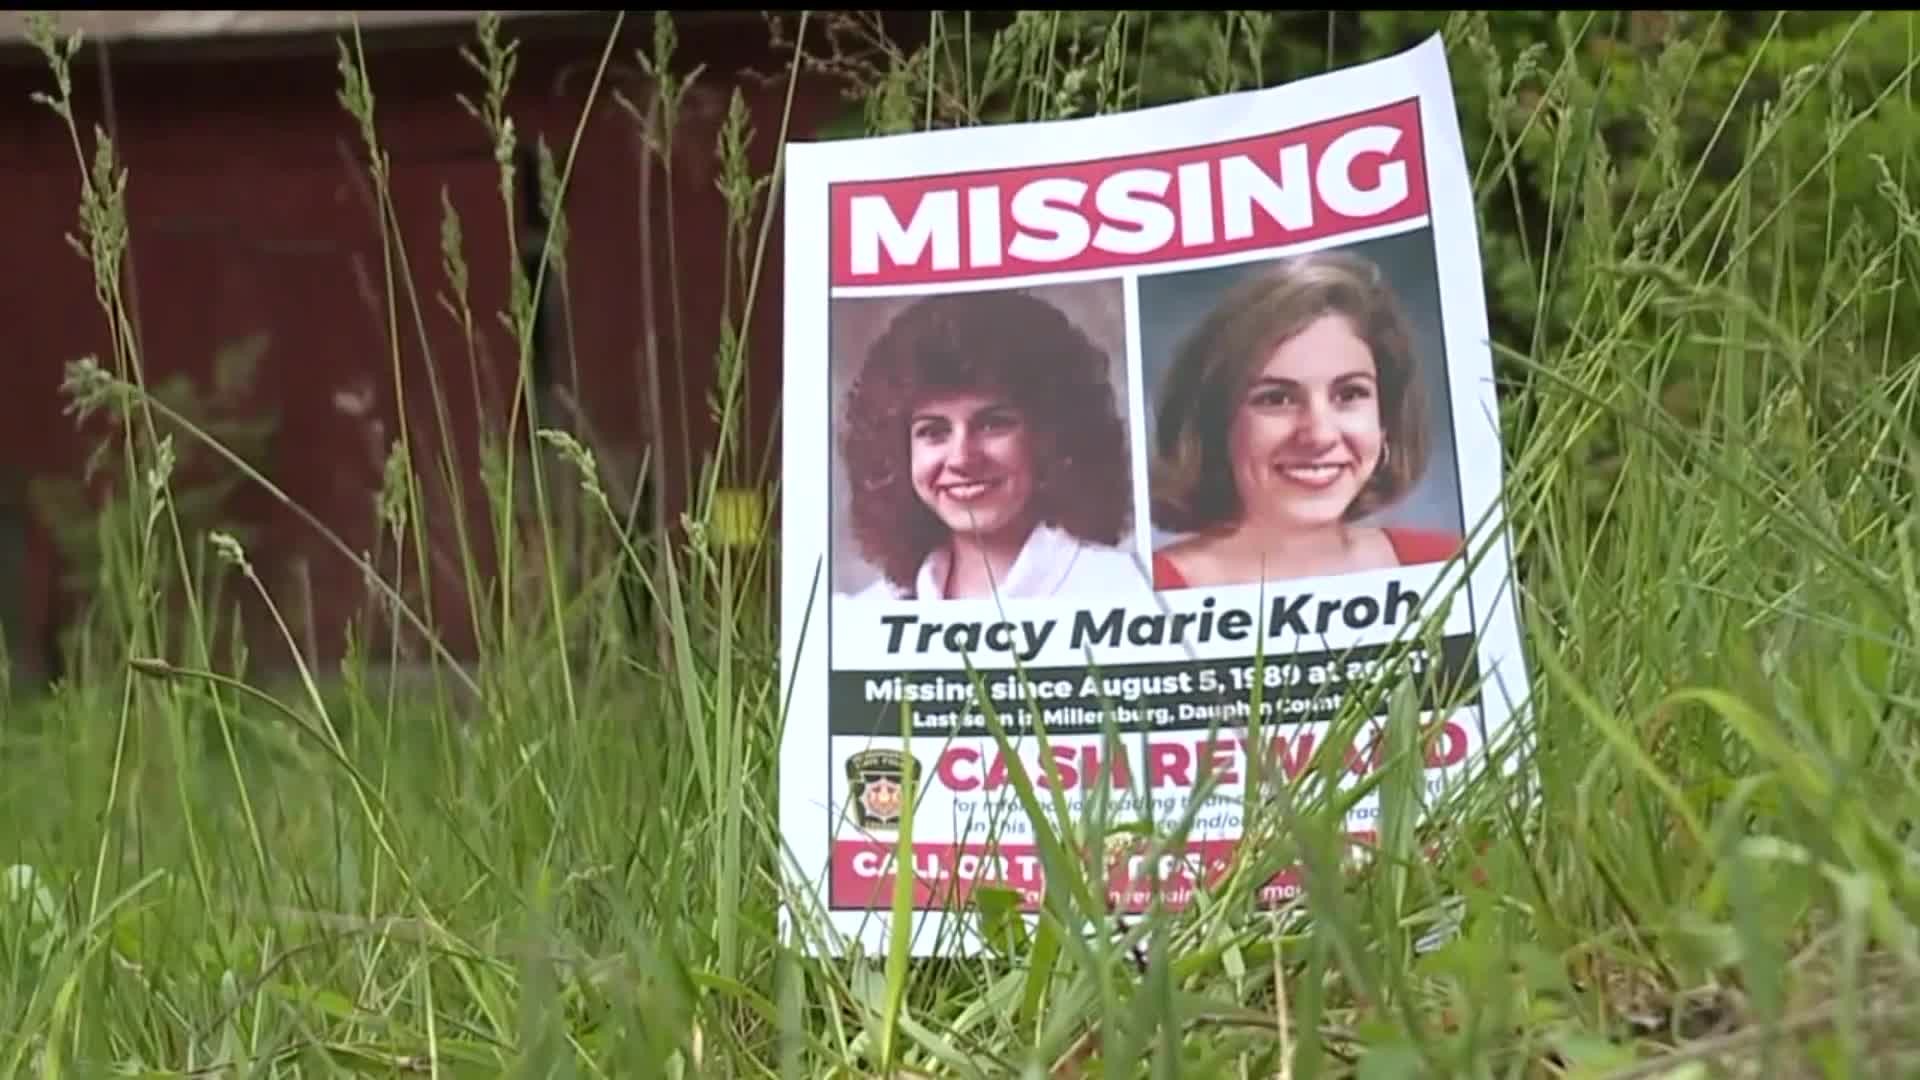 Still searching for Tracy Kroh